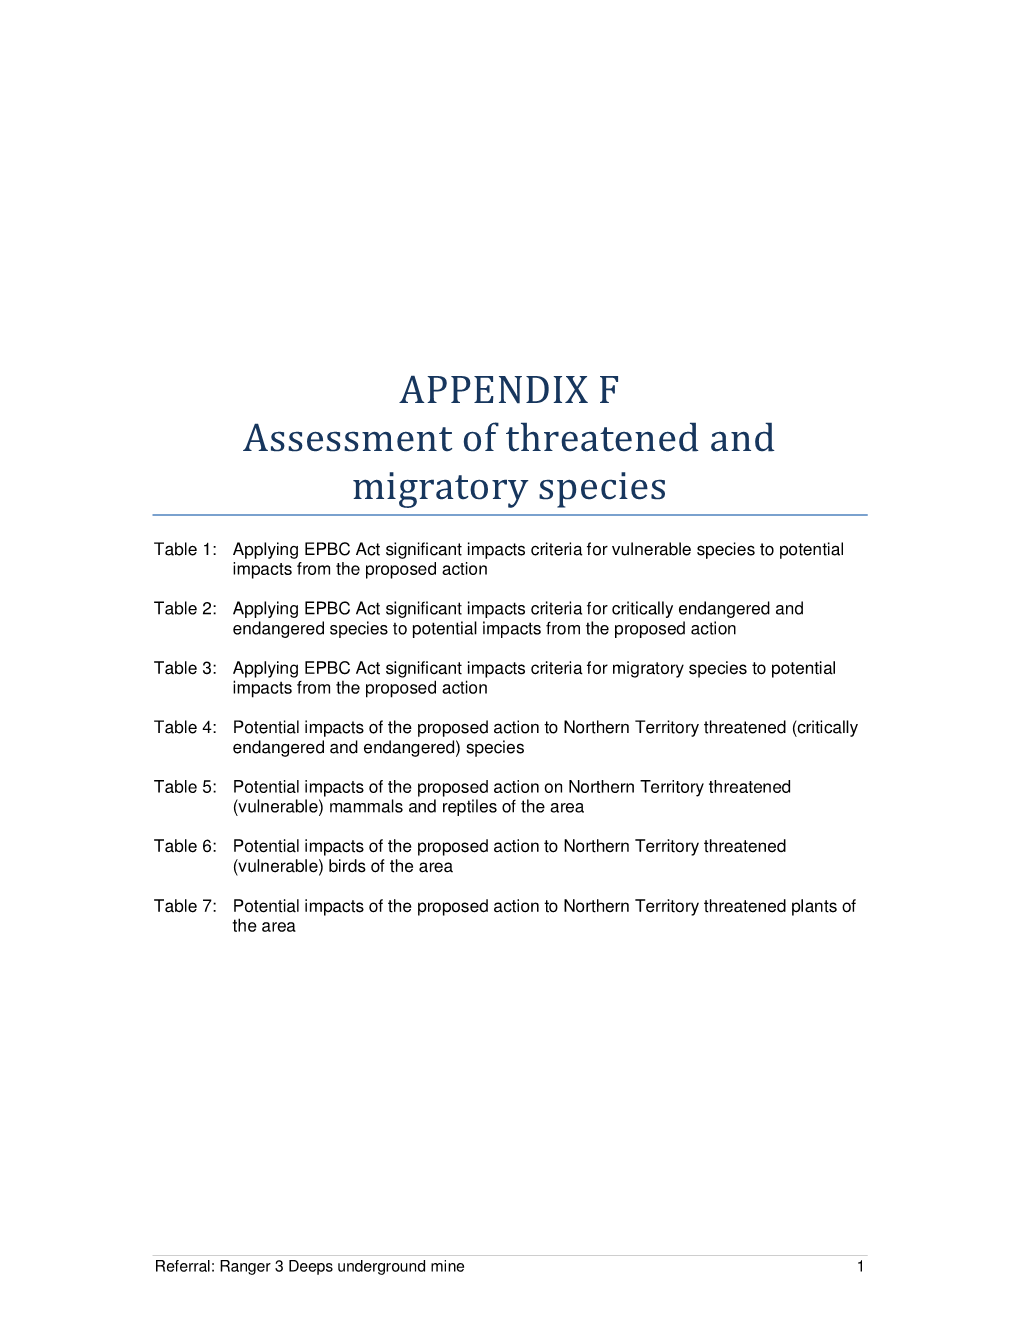 APPENDIX F Assessment of Threatened and Migratory Species